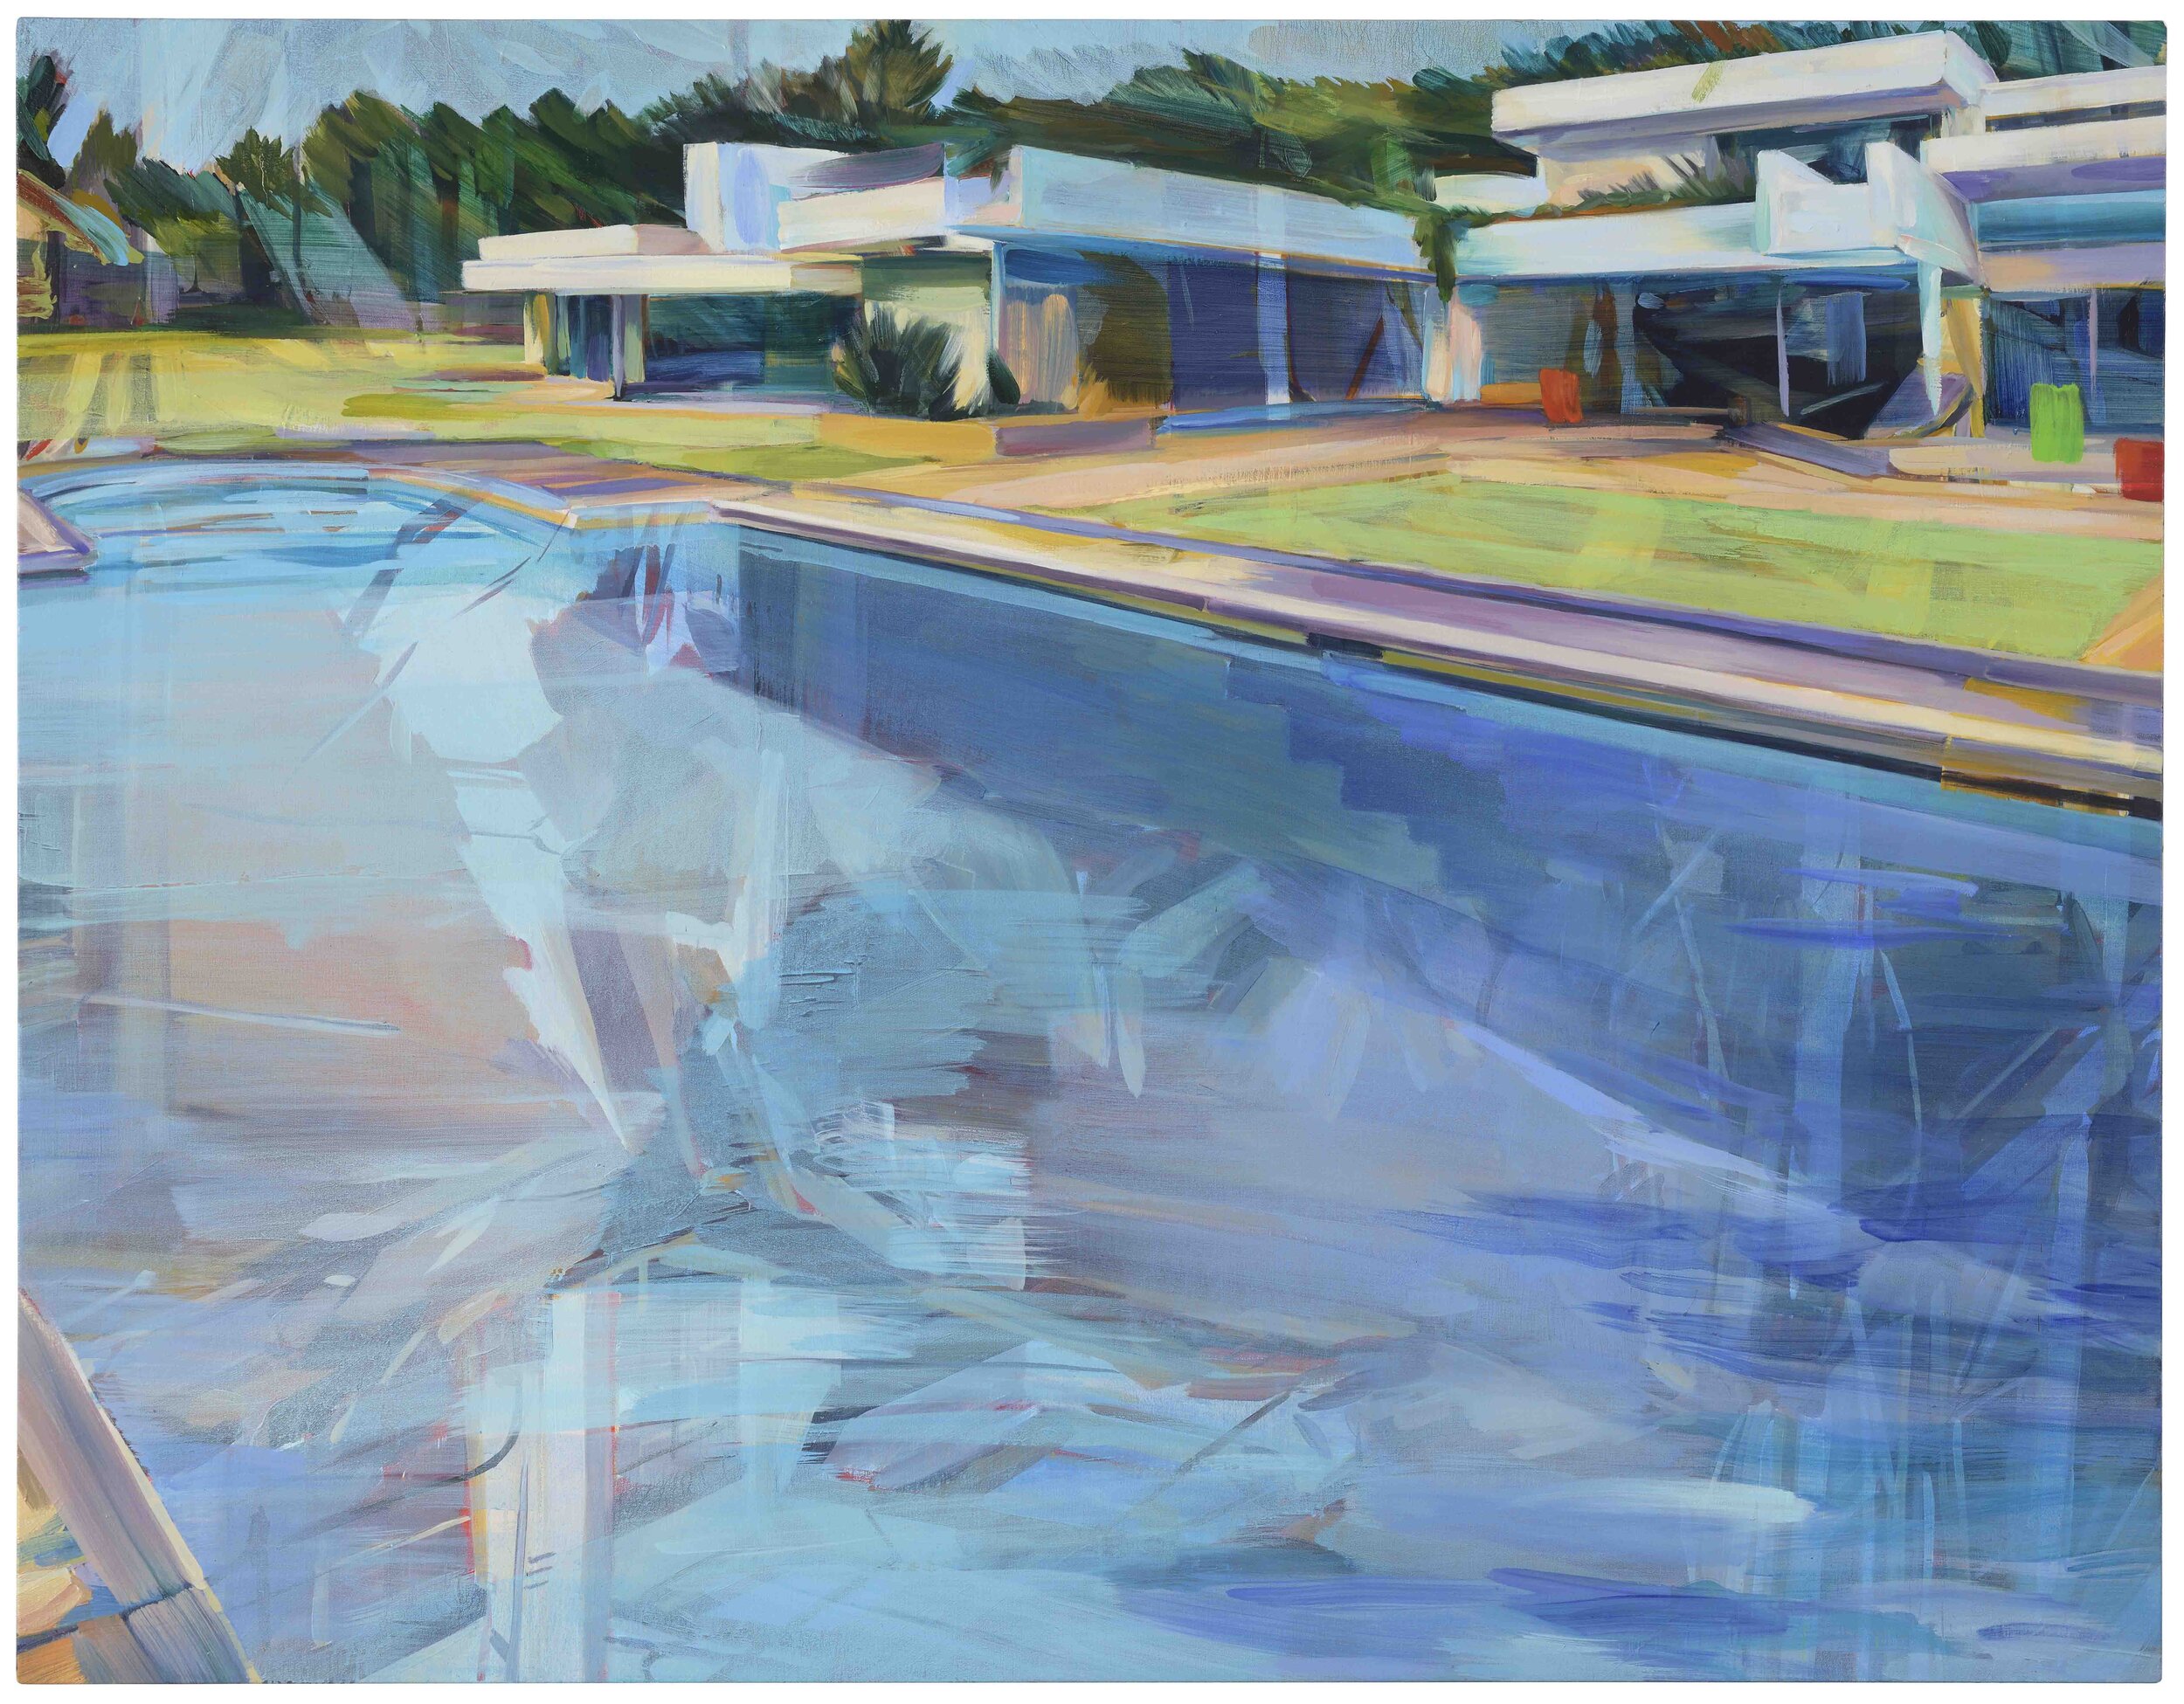   Volume and Surface (Great Zimbabwe Hotel Pool),  2020, oil on canvas, 140 x 180cm (Private collection, FR) 